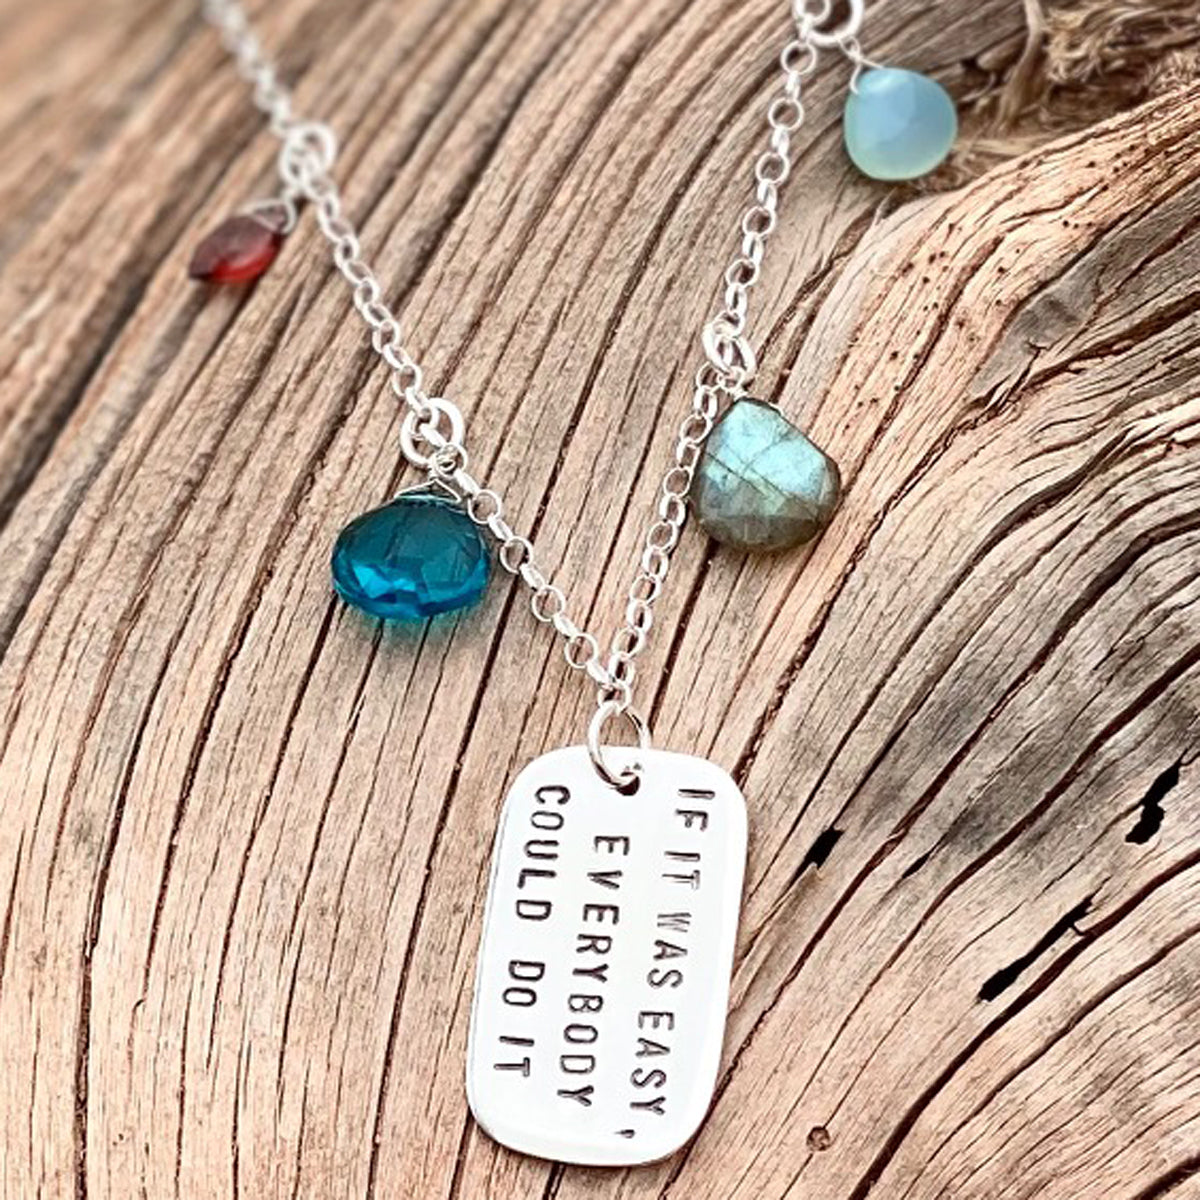 Sterling Silver Inspirational Dog Tag Quote Necklace. If It Was Easy Everybody Could Do It - Sterling Silver Motivational Dog Tag Quote Necklace. Good Vibes Only. We all need a little Empowerment, Motivation and a Little Push. You can never quit. Winners never quit, and quitters never win.